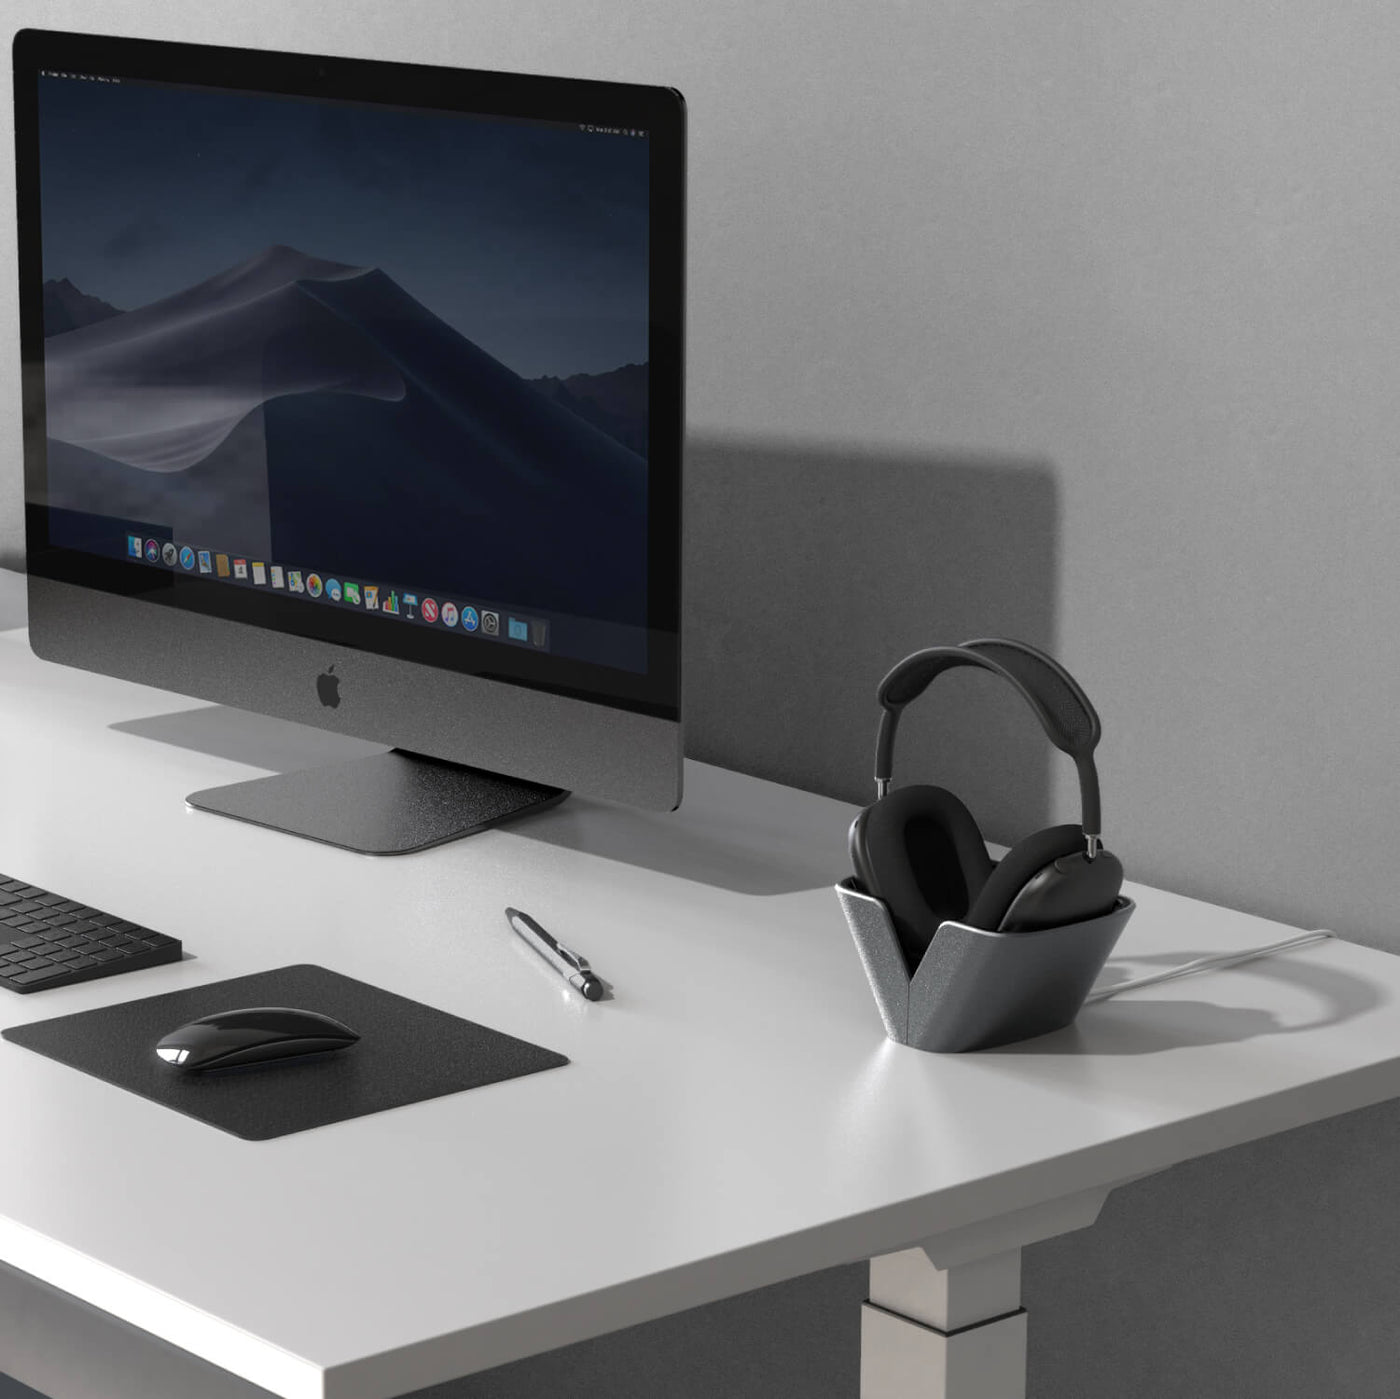 Office desk with computer, mouse, keyboard, and AirPods Max headphones inside Raptic Basestand